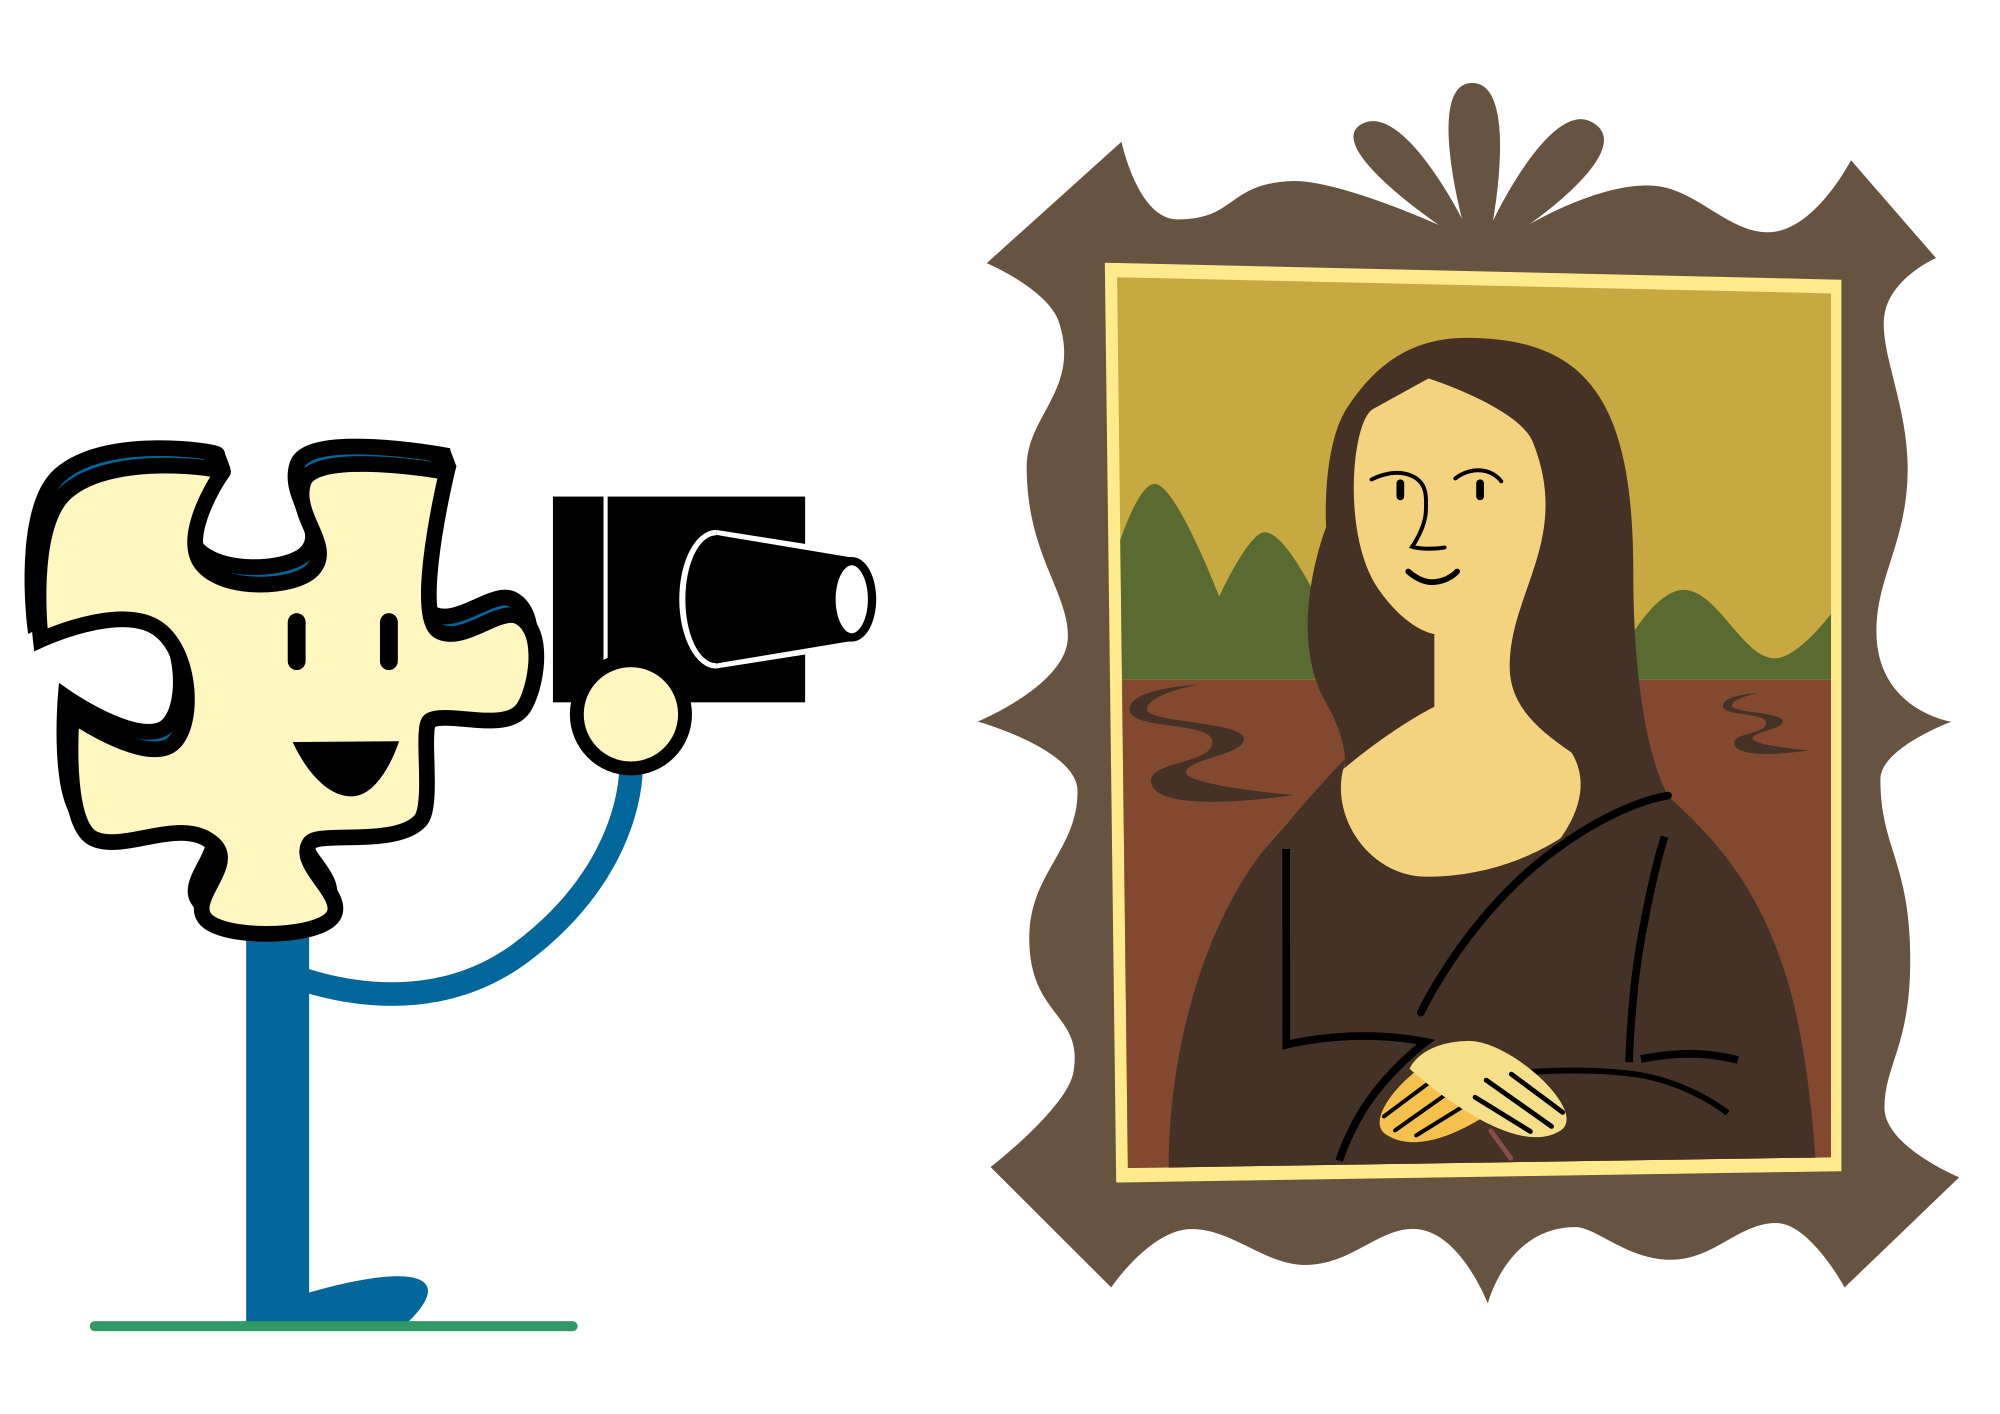 File:Puzzly taking a photo of the Mona Lisa.svg